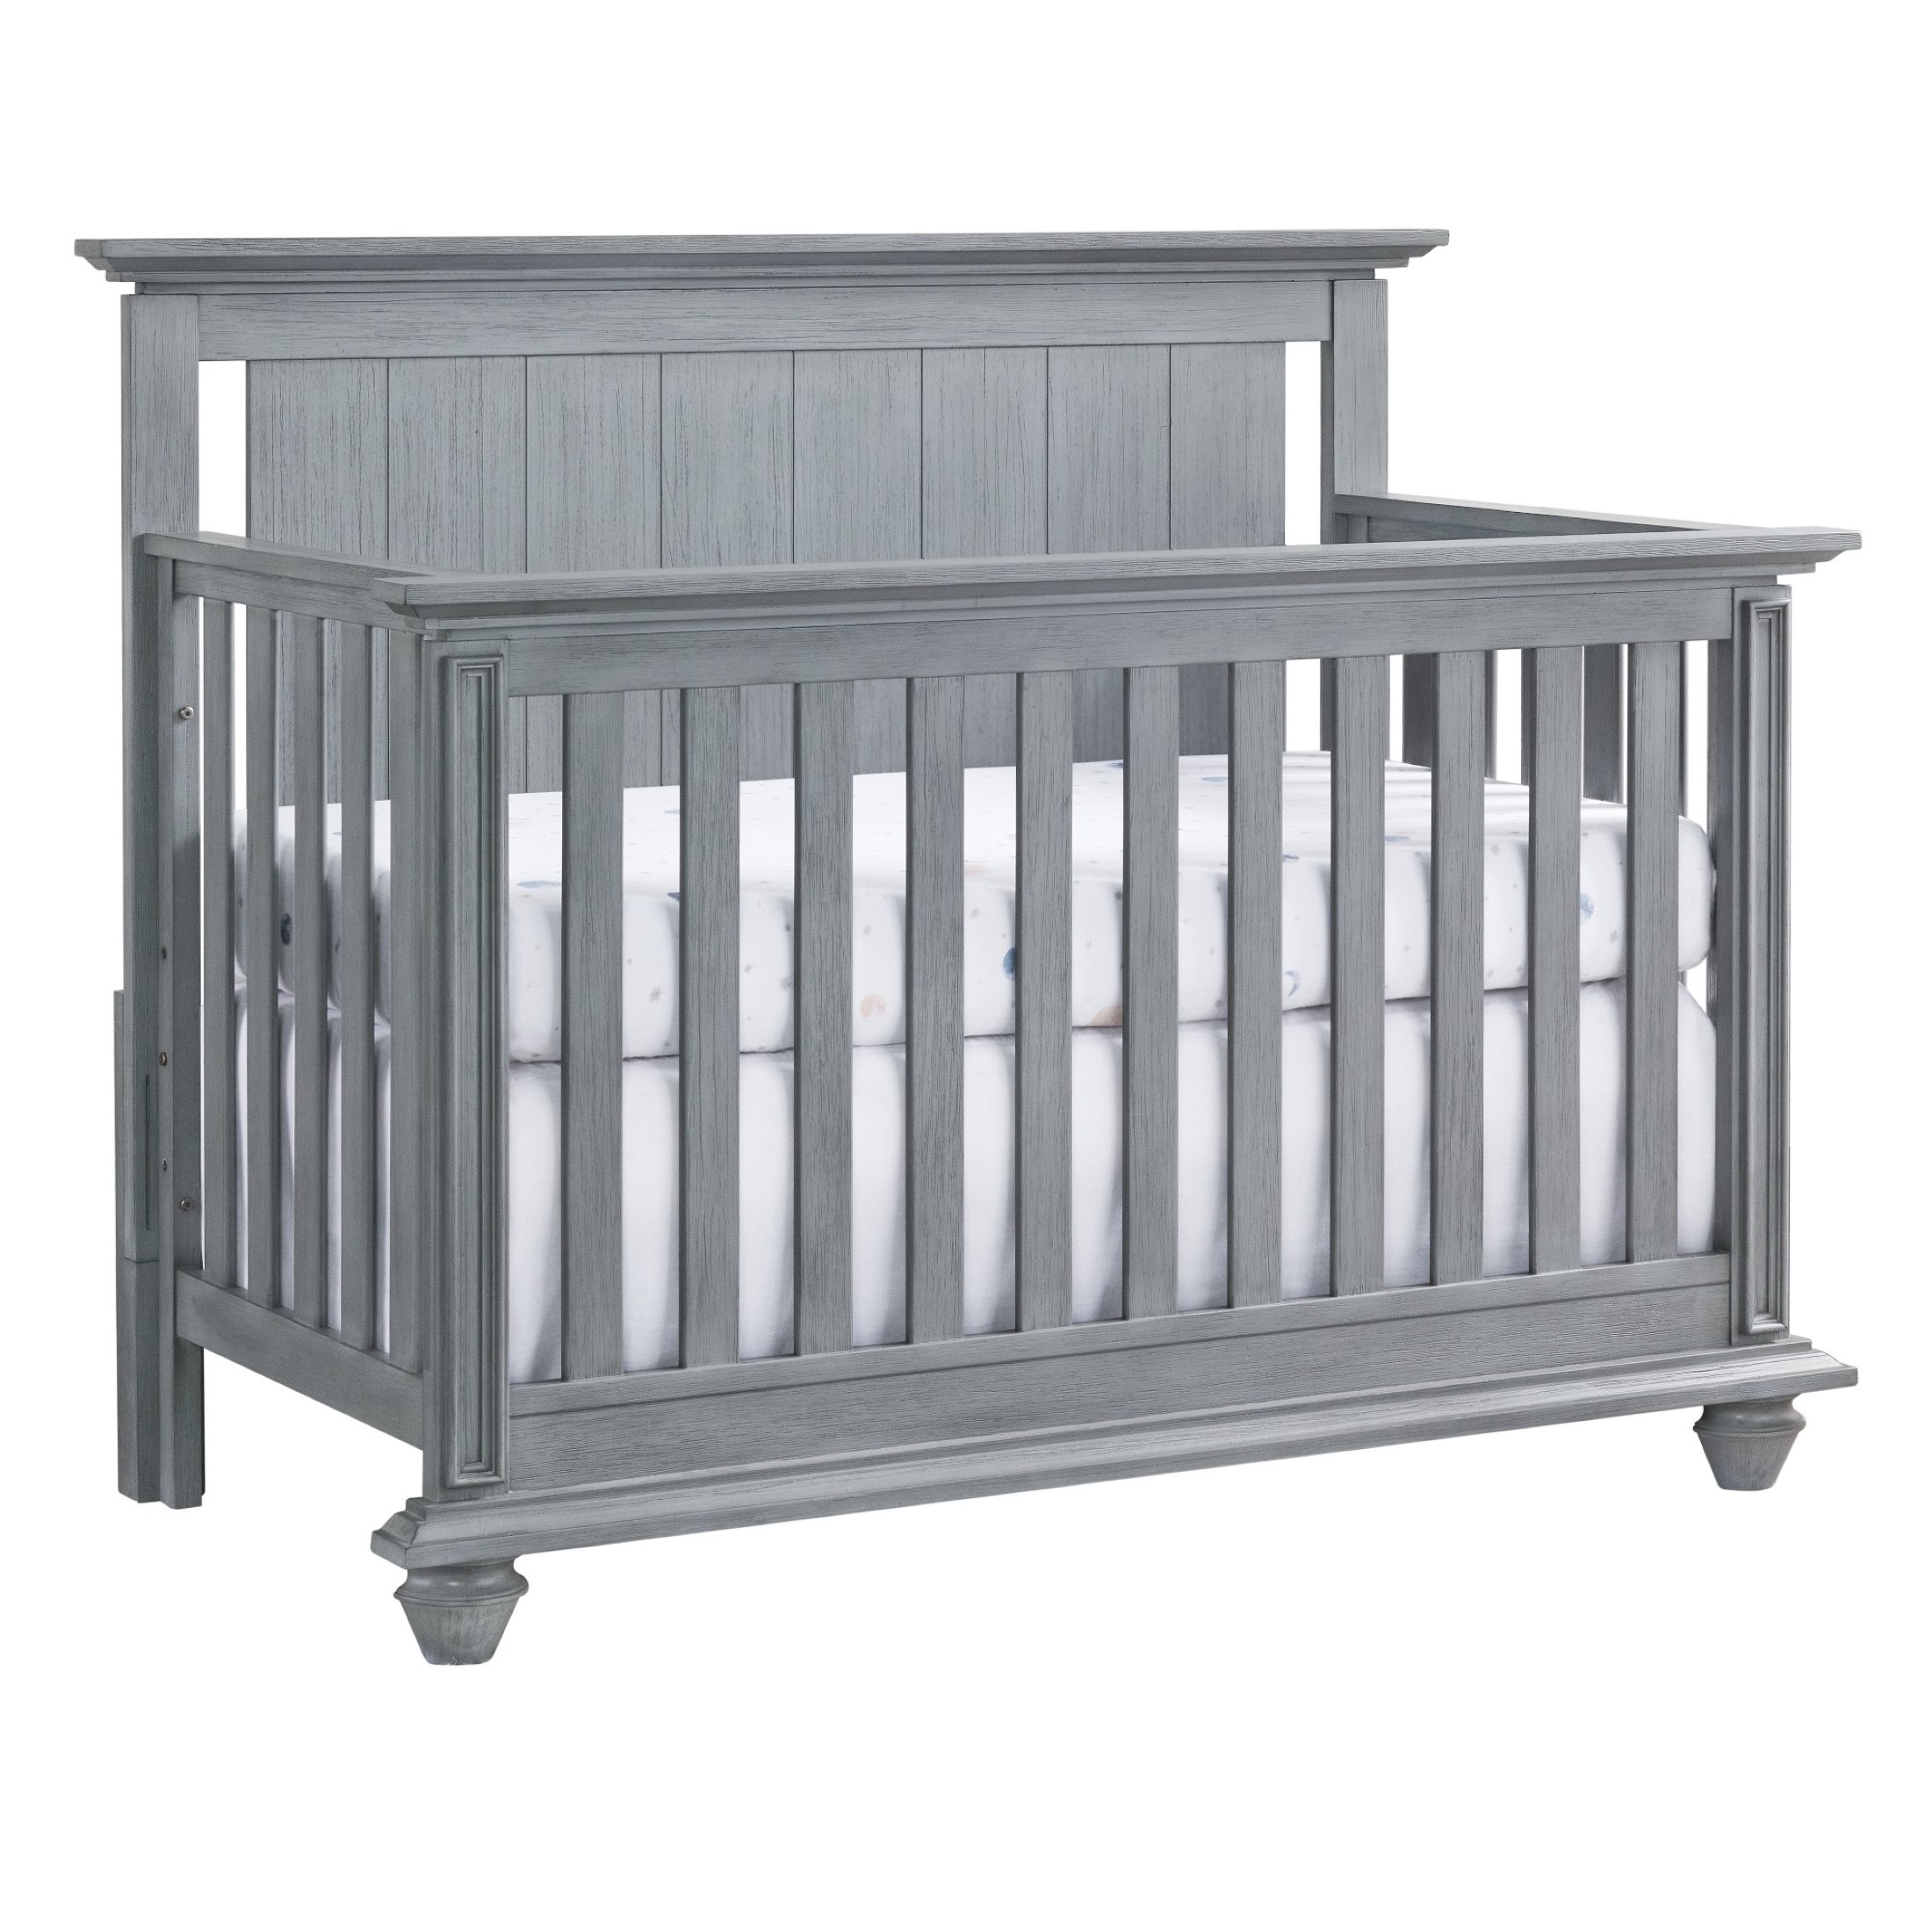 Oxford Baby Langston 4-in-1 Convertible Crib, Graphite Gray, Wooden Crib - image 3 of 11